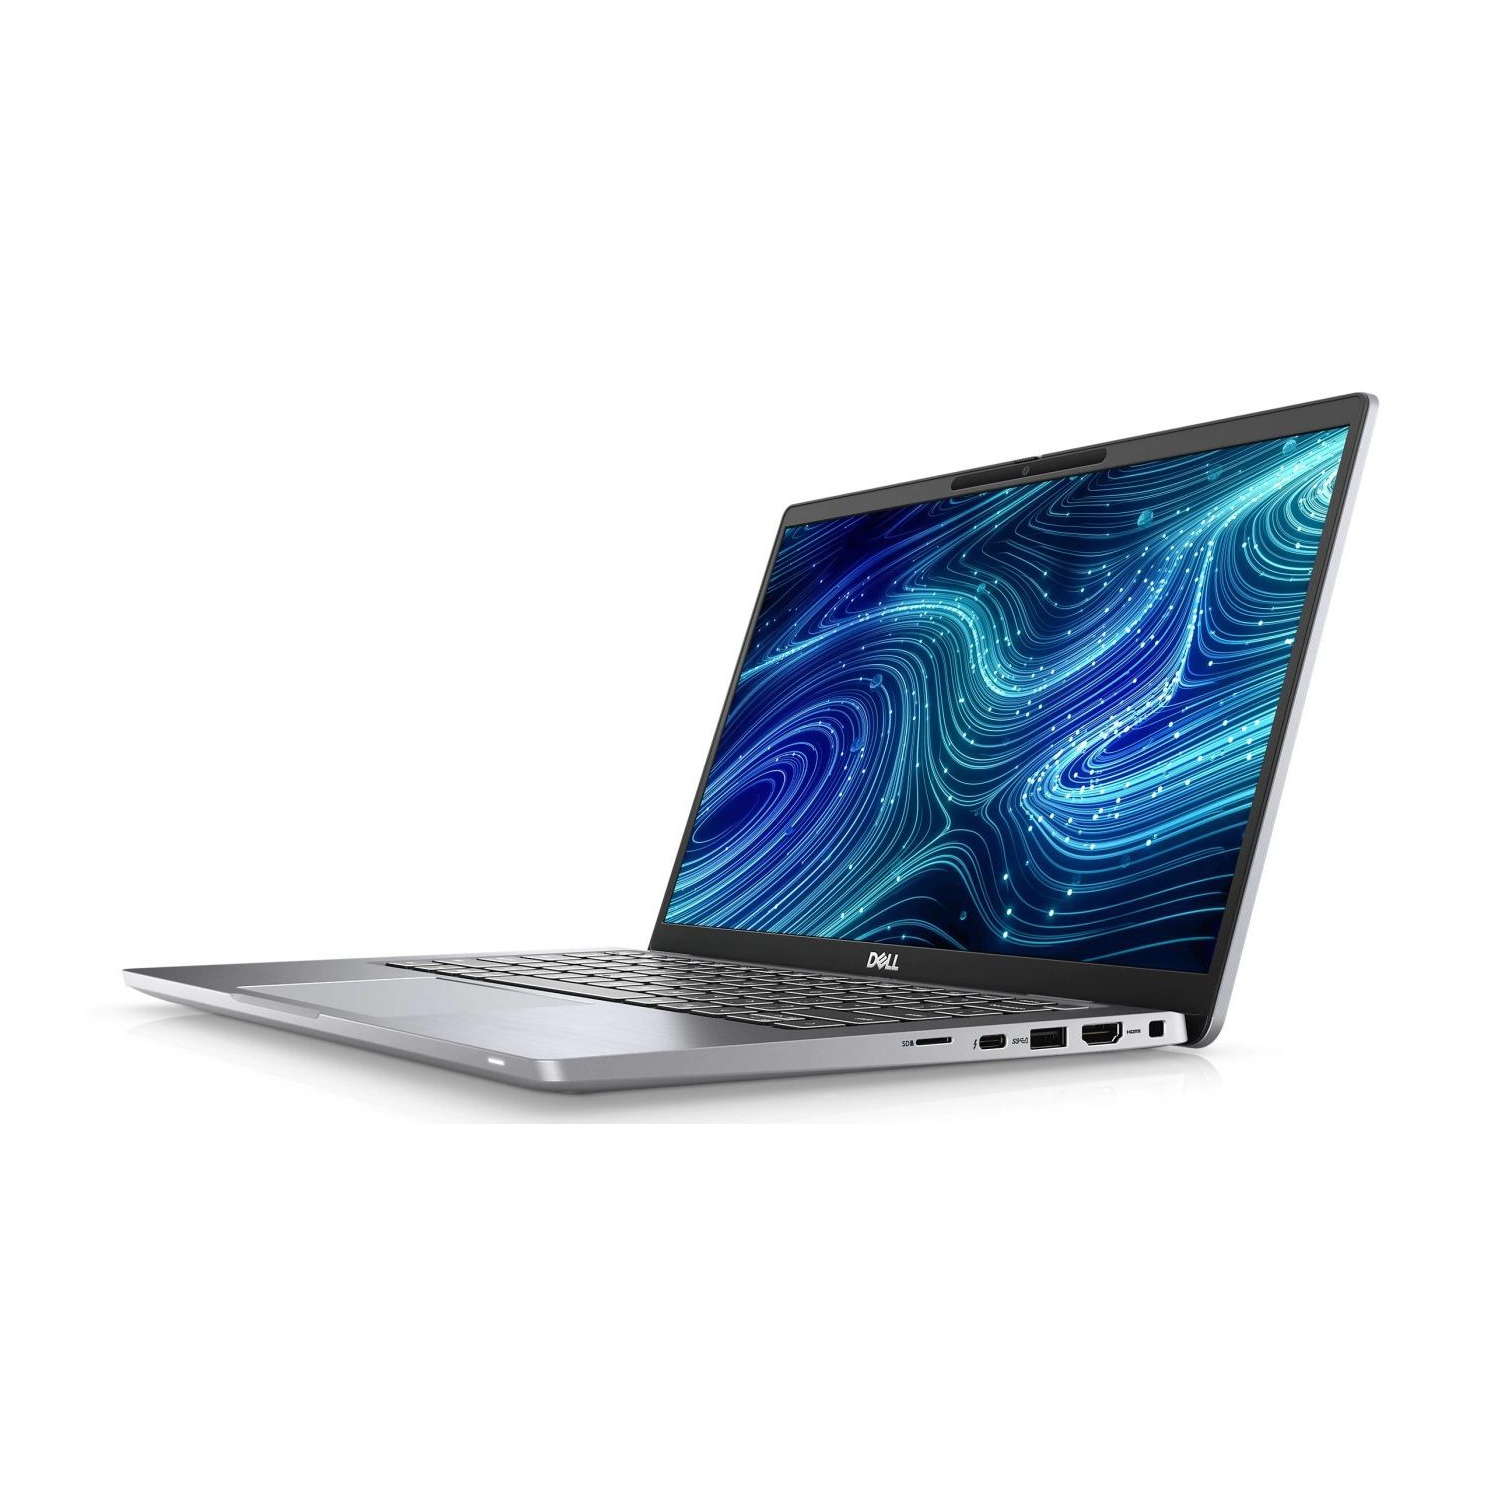 Refurbished (Excellent) - Dell Latitude 7000 7420 Laptop (2021) | 14" FHD | Core i7 - 128GB SSD - 16GB RAM | 4 Cores @ 4.7 GHz - 11th Gen CPU Certified Refurbished